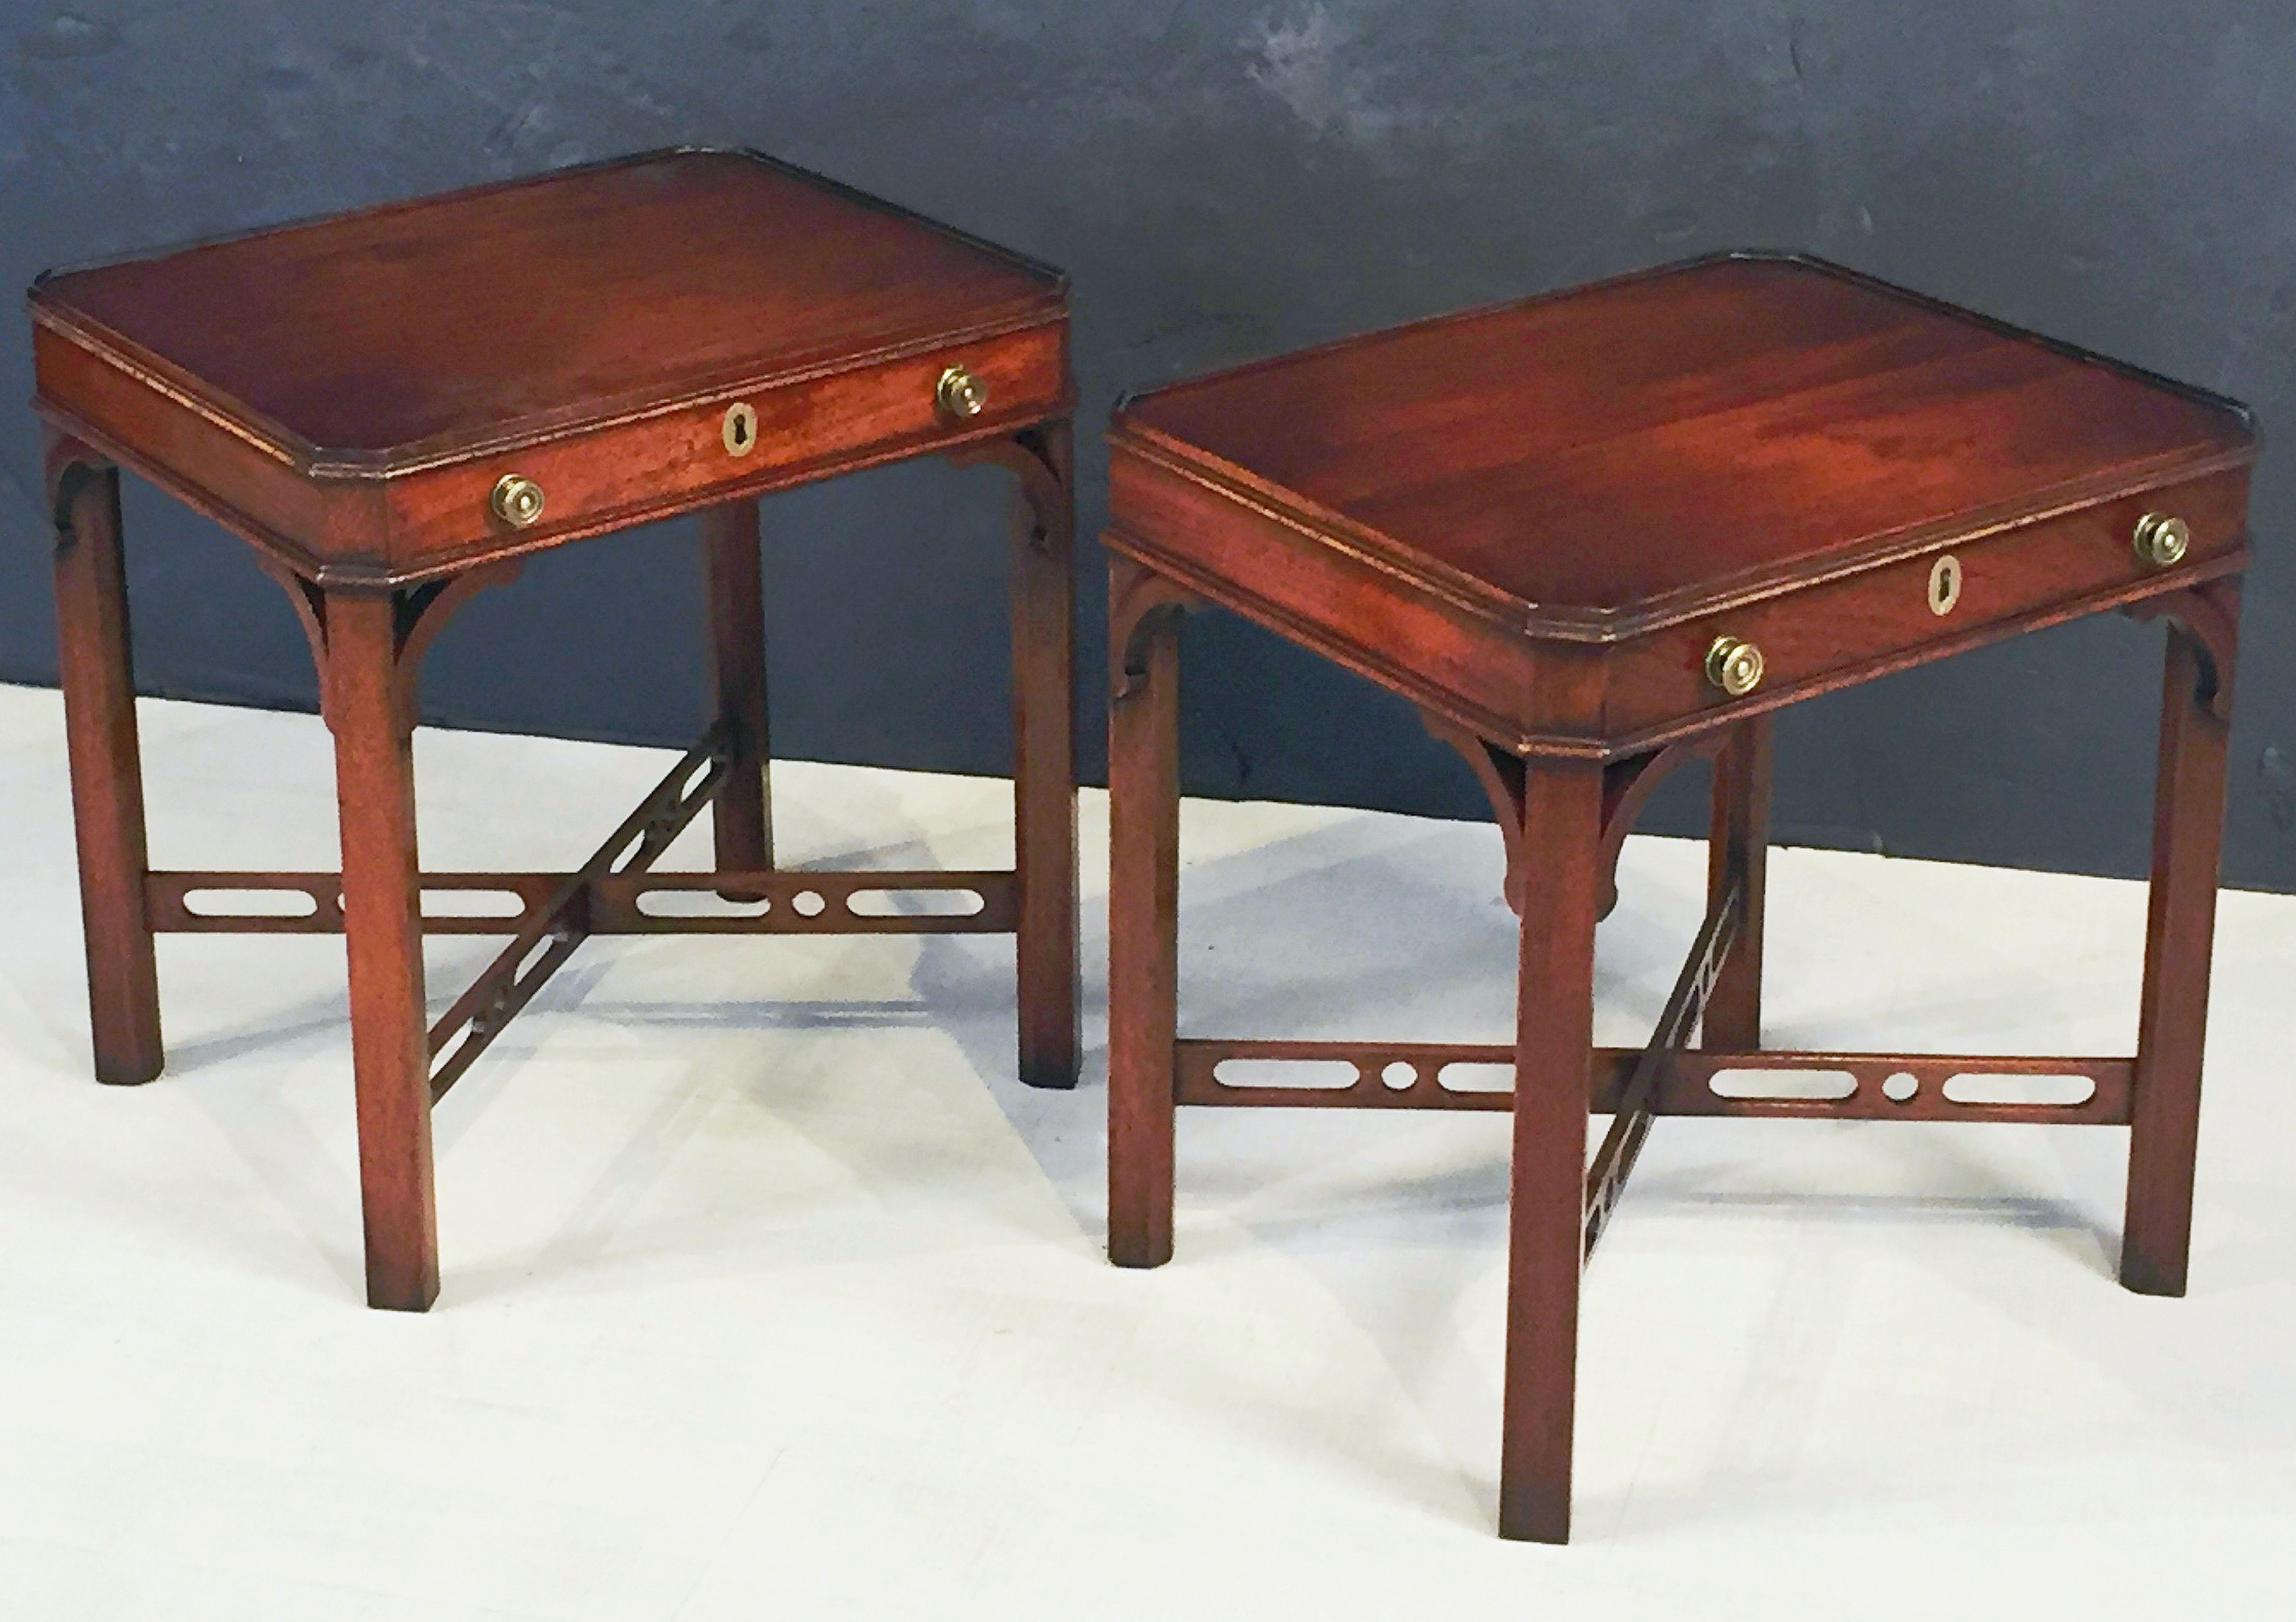 A fine pair of English side, occasional, or end tables of mahogany, in the Chippendale style - each table featuring a rectangular moulded top with canted corners, over a frieze with one long drawer and brass pulls and escutcheon, set upon canted